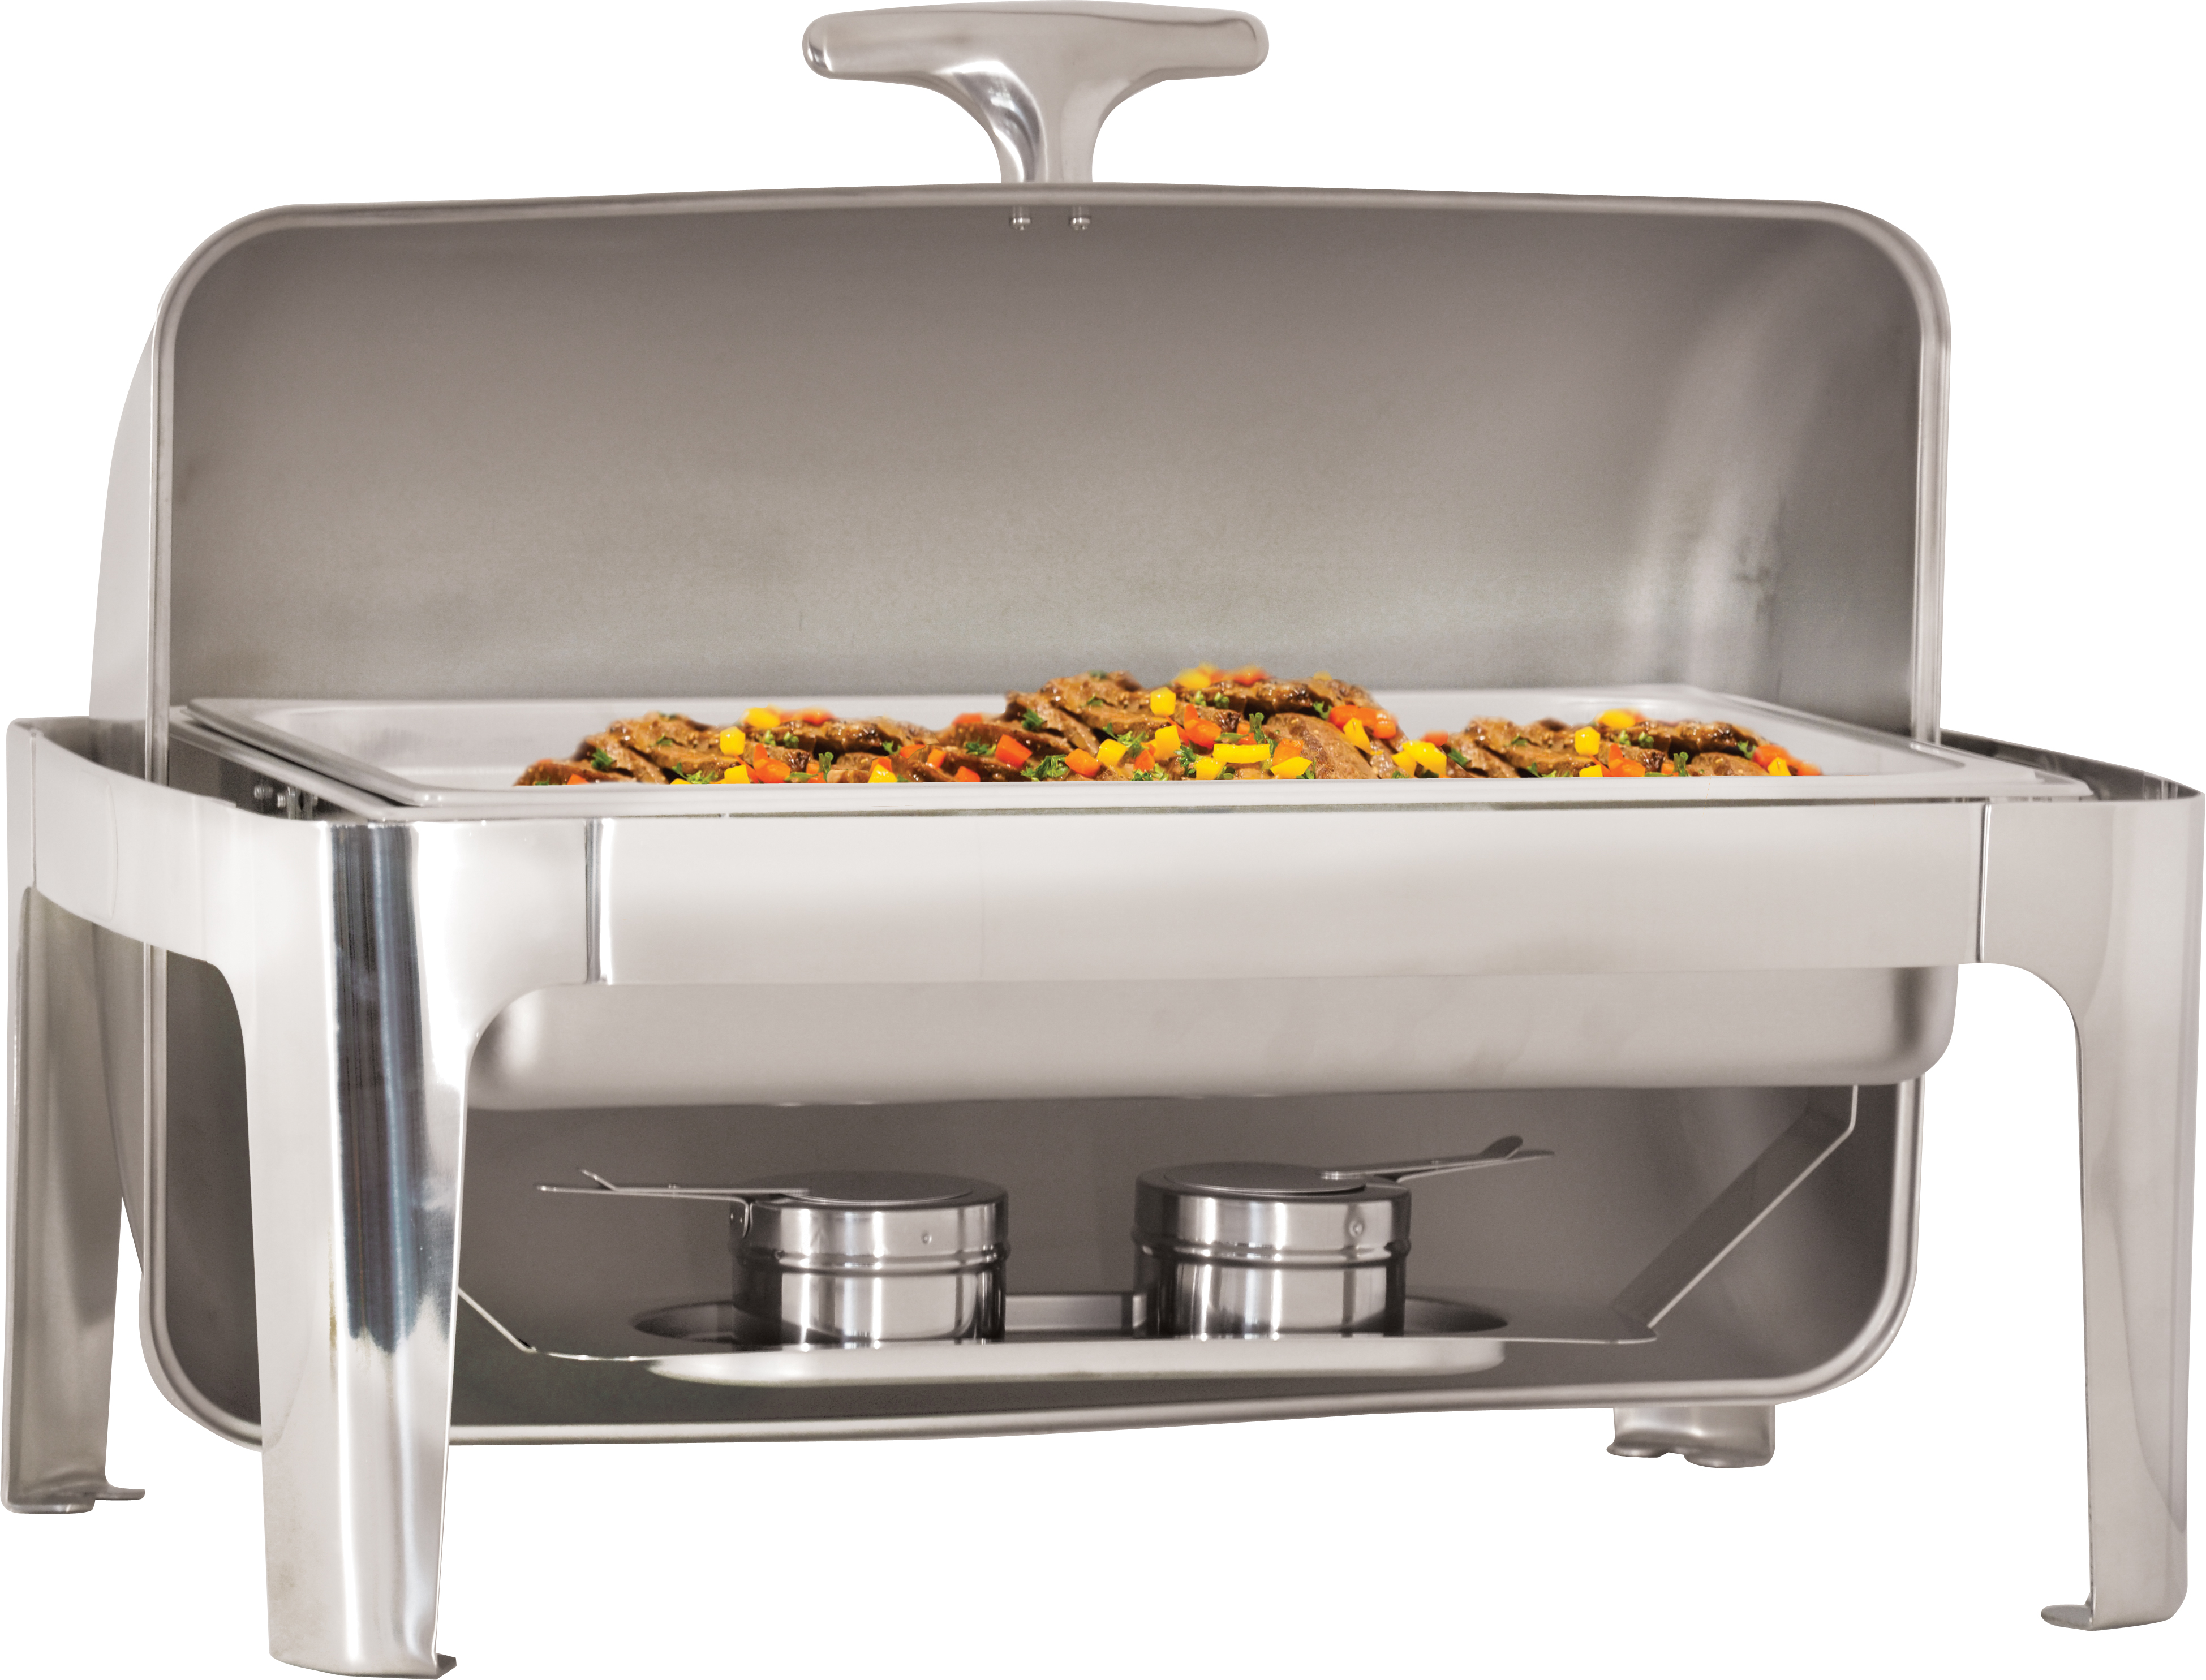 Details about   9 Quart Stainless Steel Roll Top Chafing Dish 